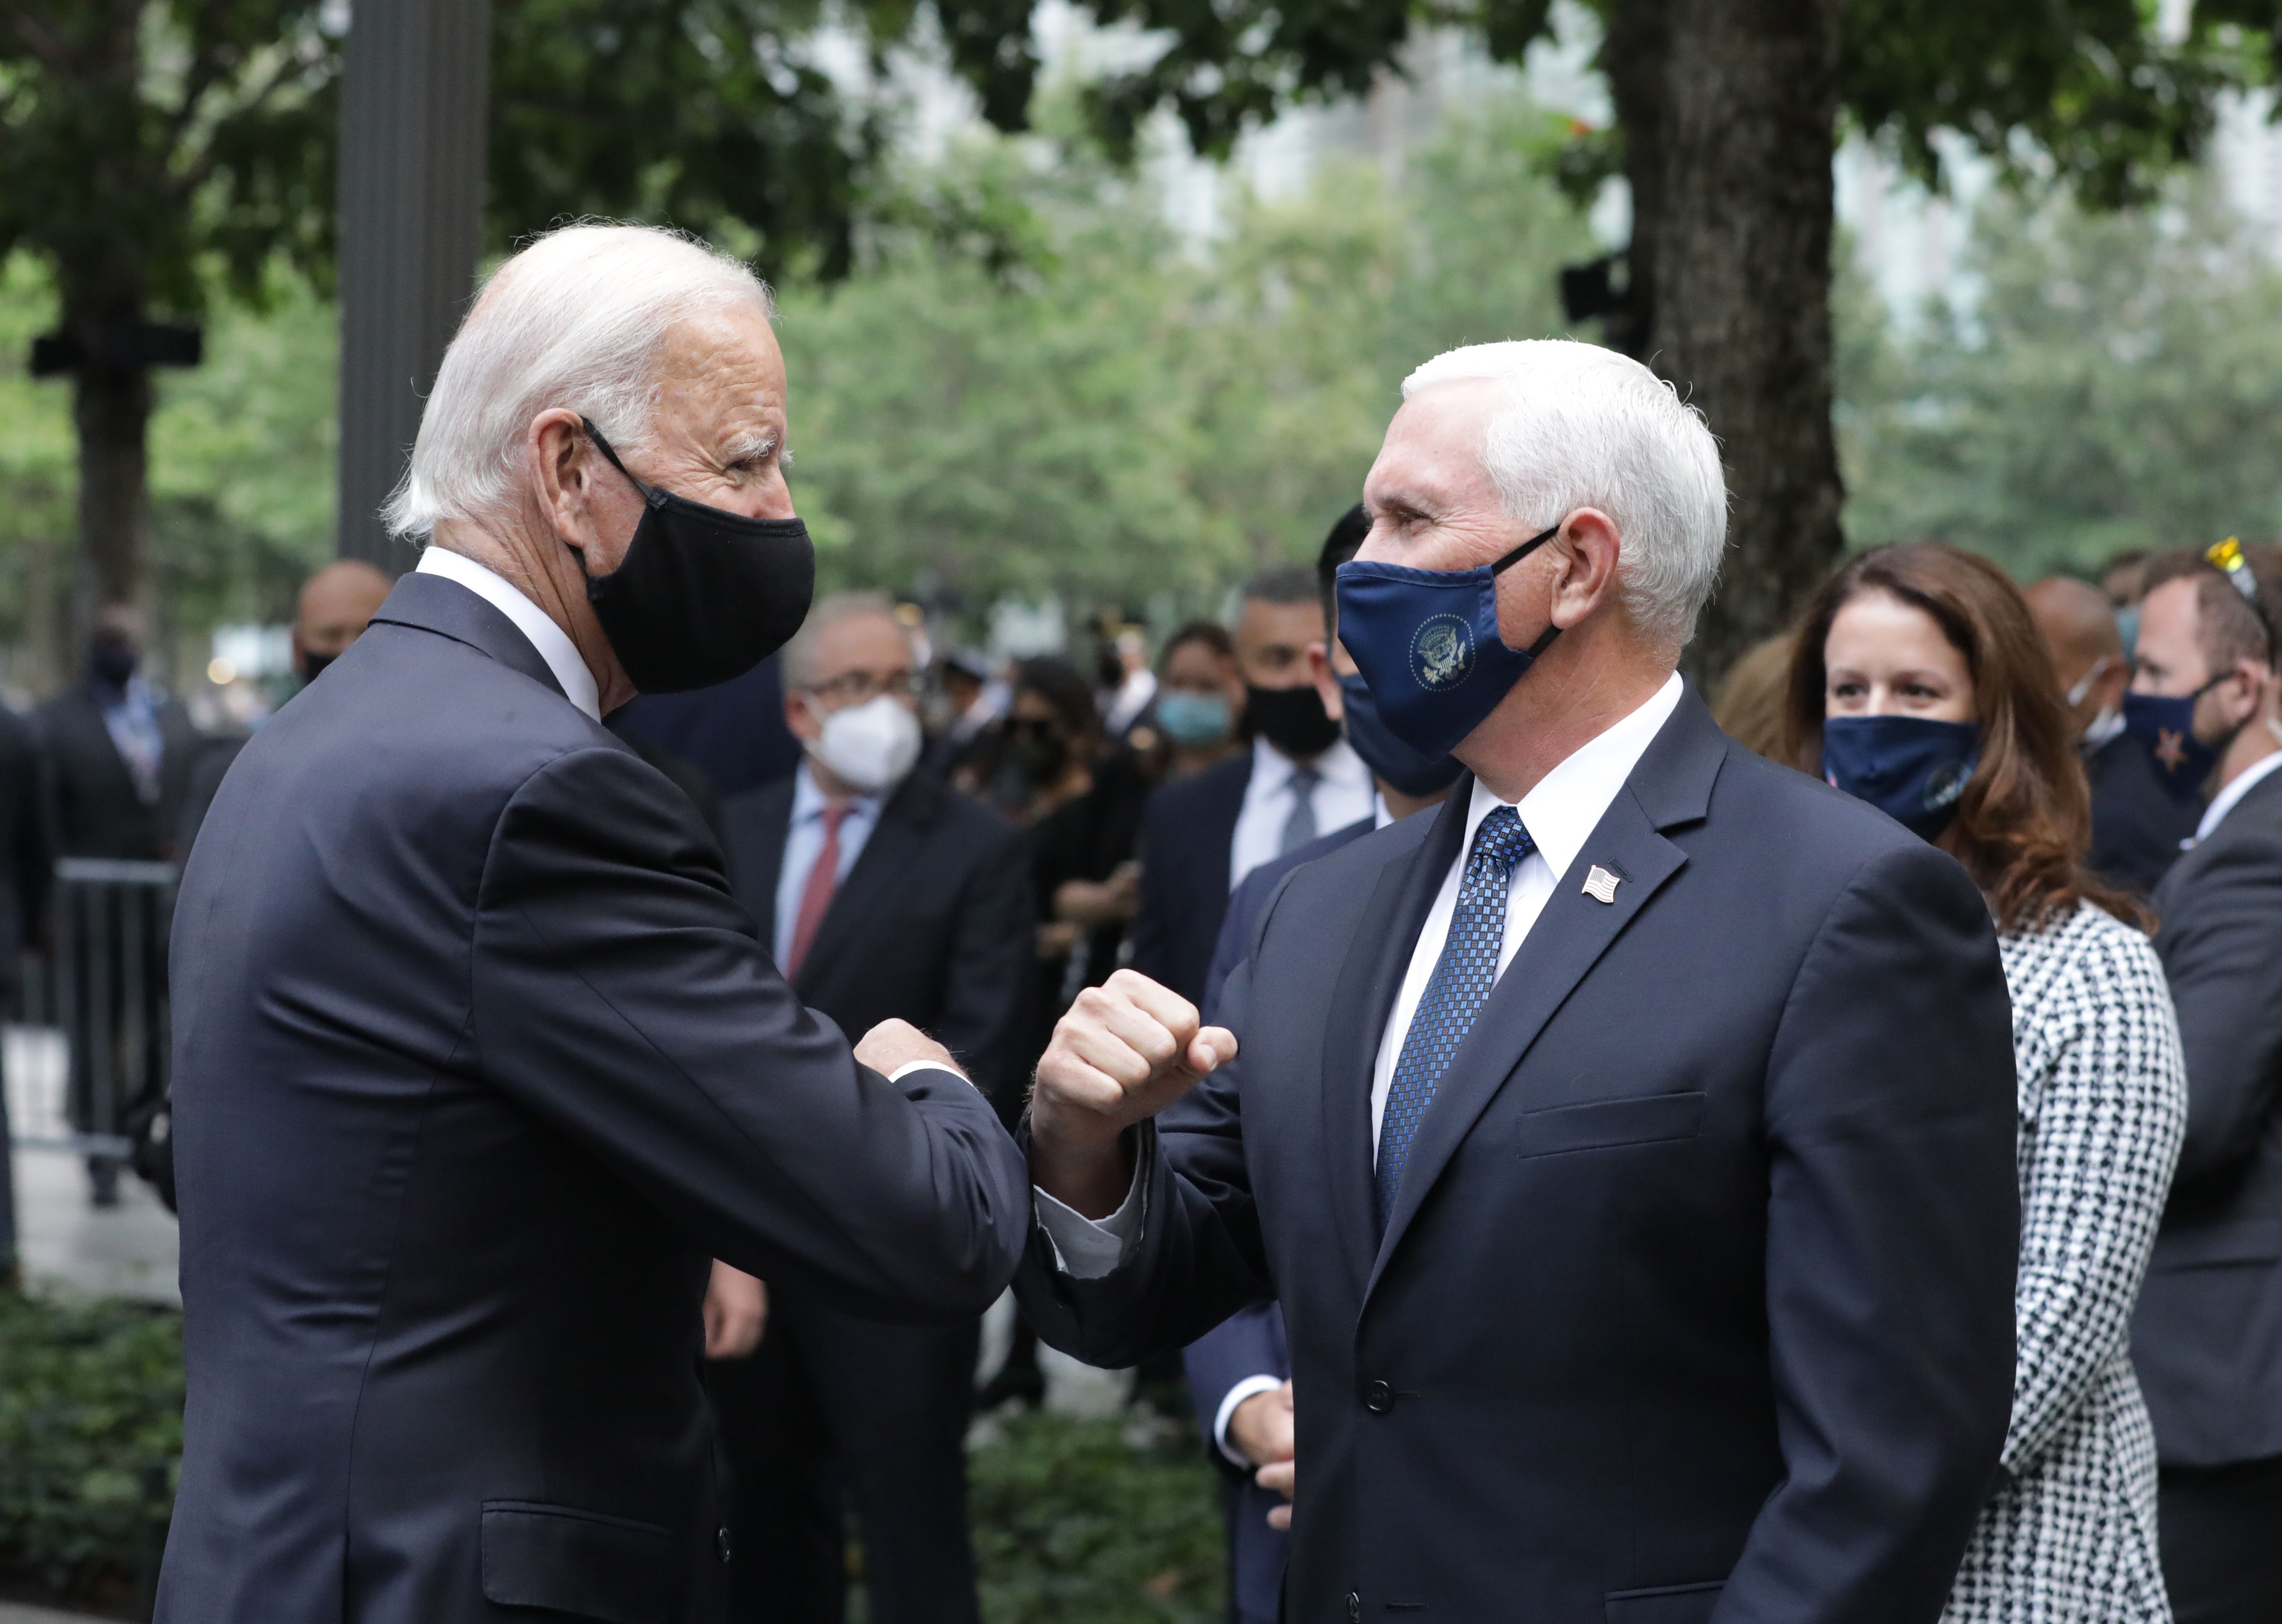 Vice presidents Mike Pence and Joe Biden bump elbows at a ceremony at the 9/11 Memorial in New York City.